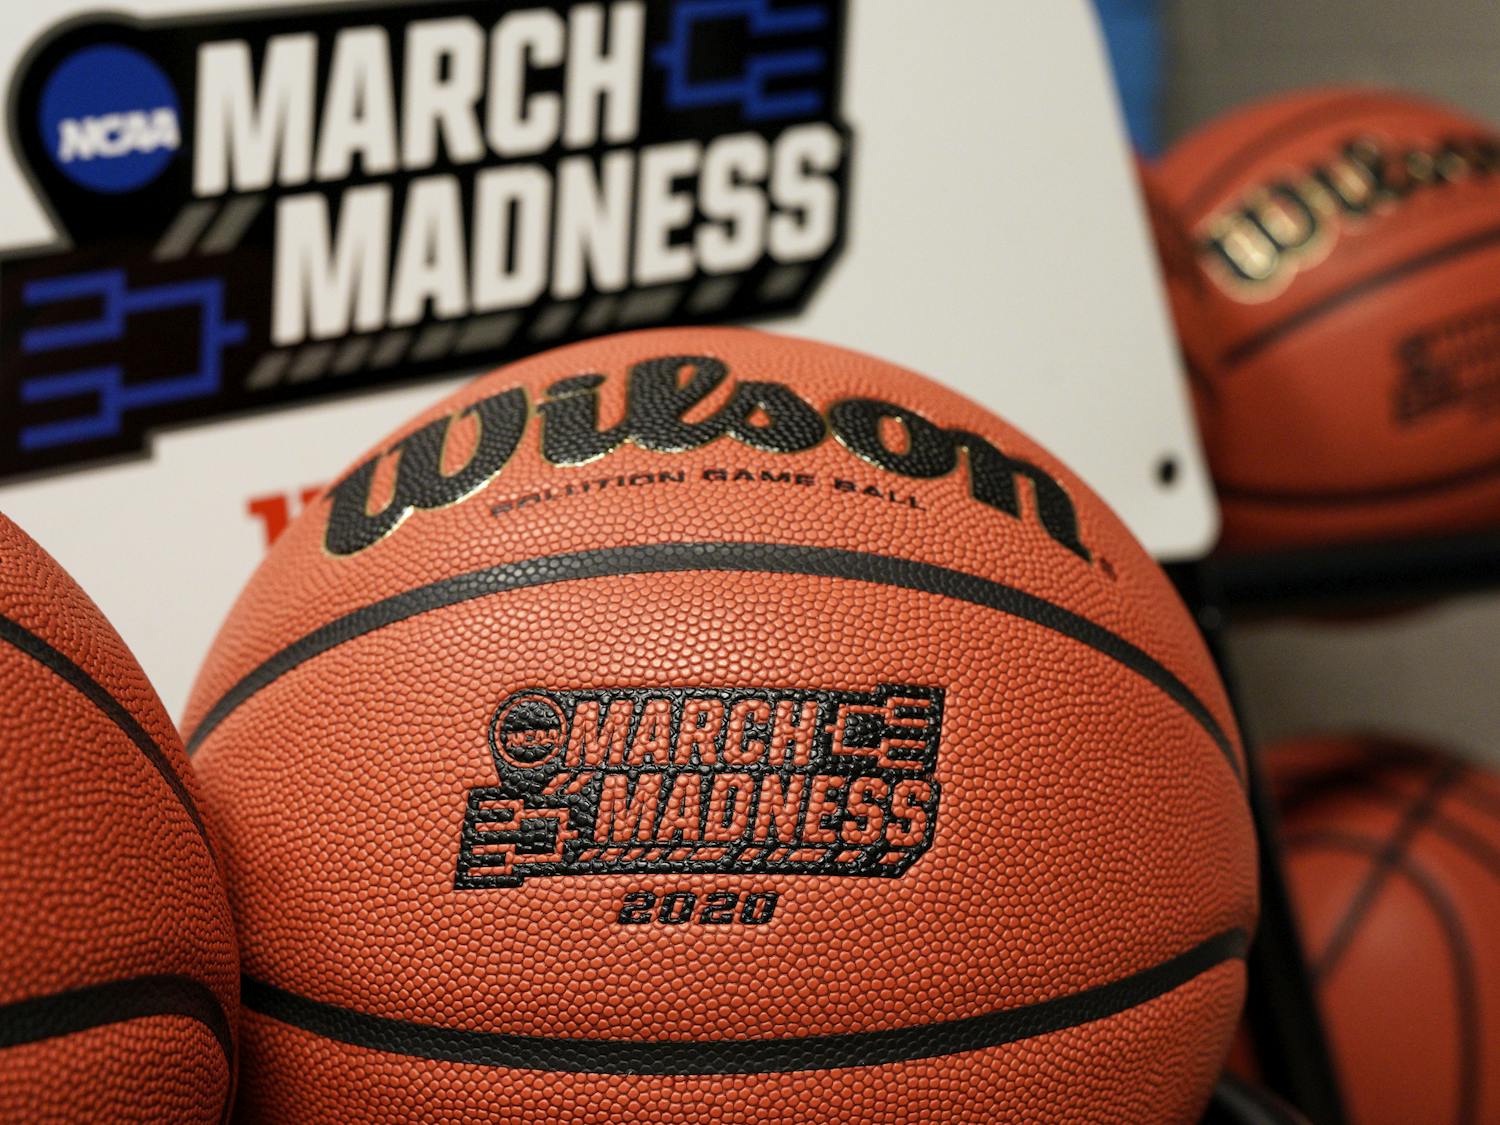 Official March Madness 2020 tournament basketballs are seen in a store room at the CHI Health Center Arena, in Omaha, Neb., Monday, March 16, 2020.